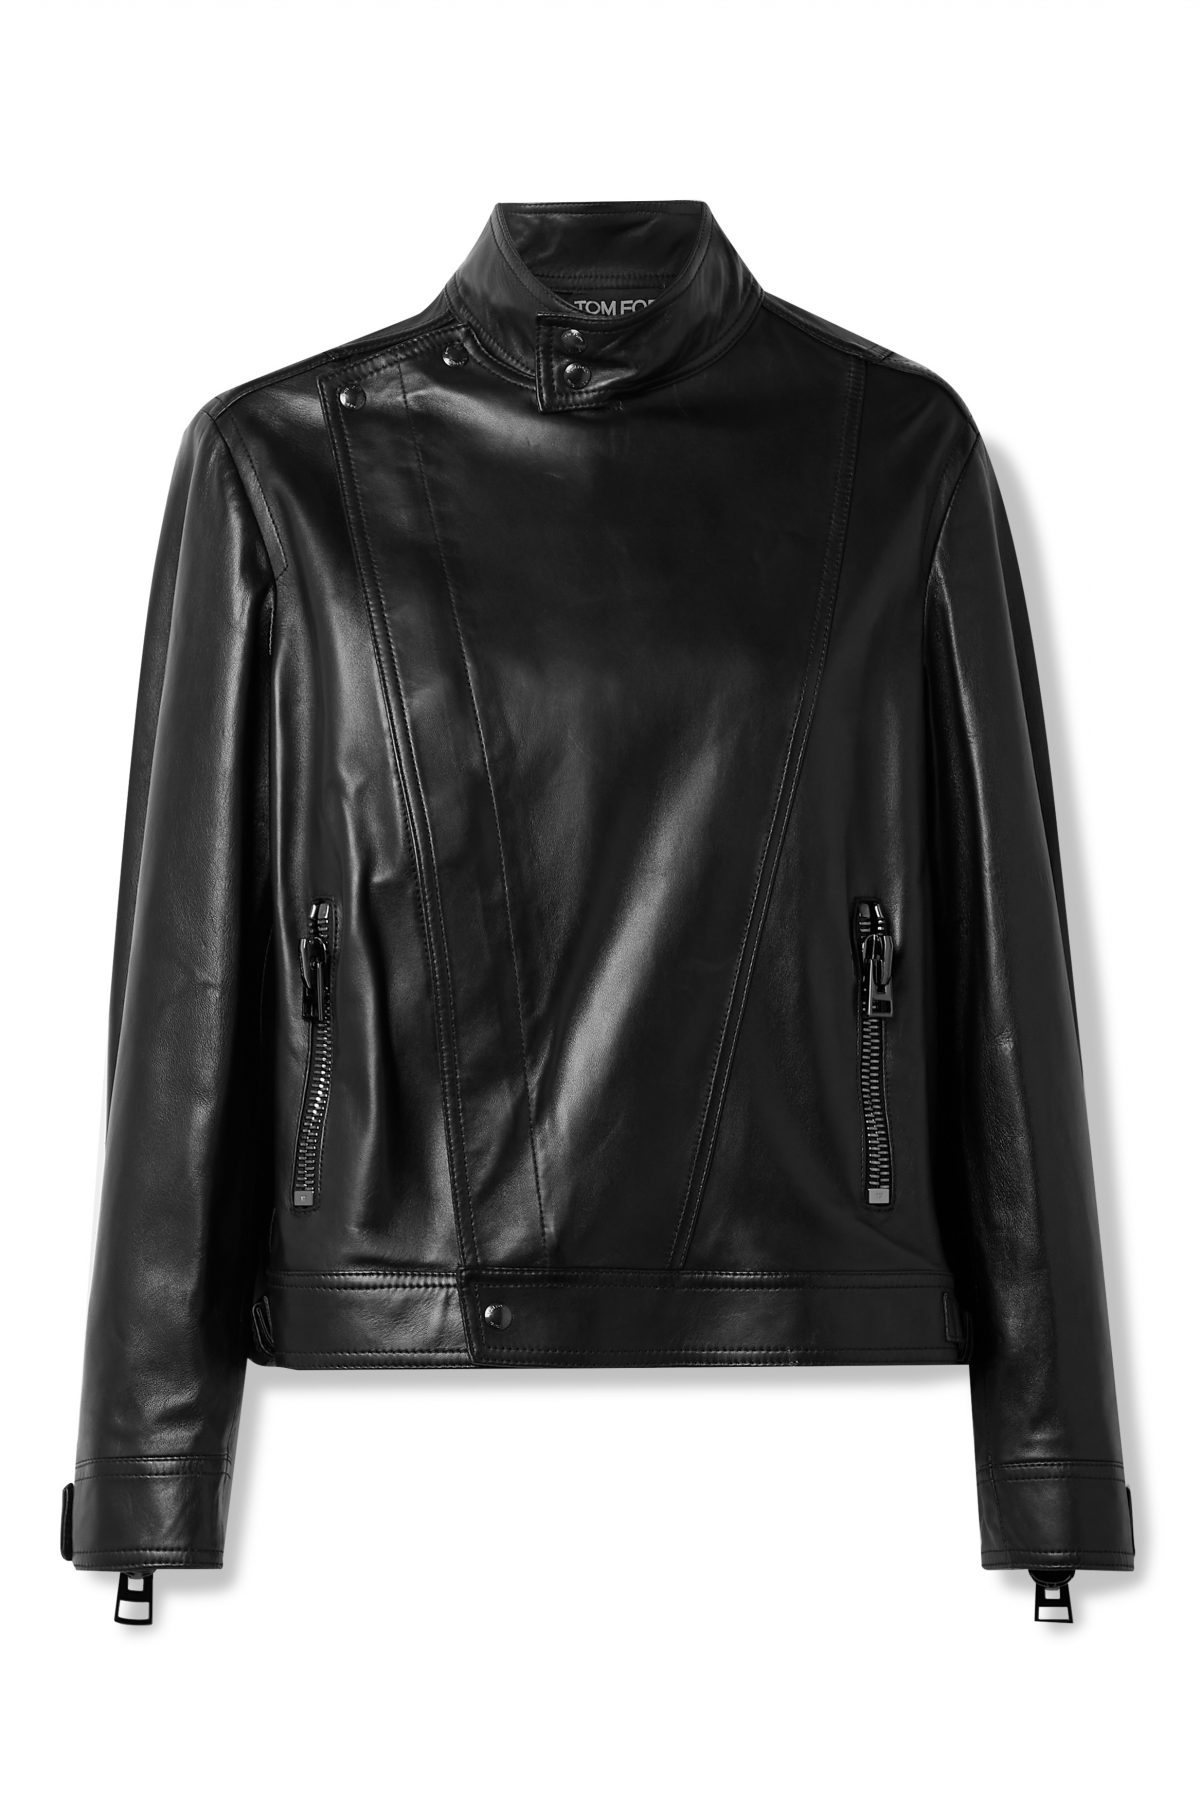 Best Women's Leather Jackets for 2021